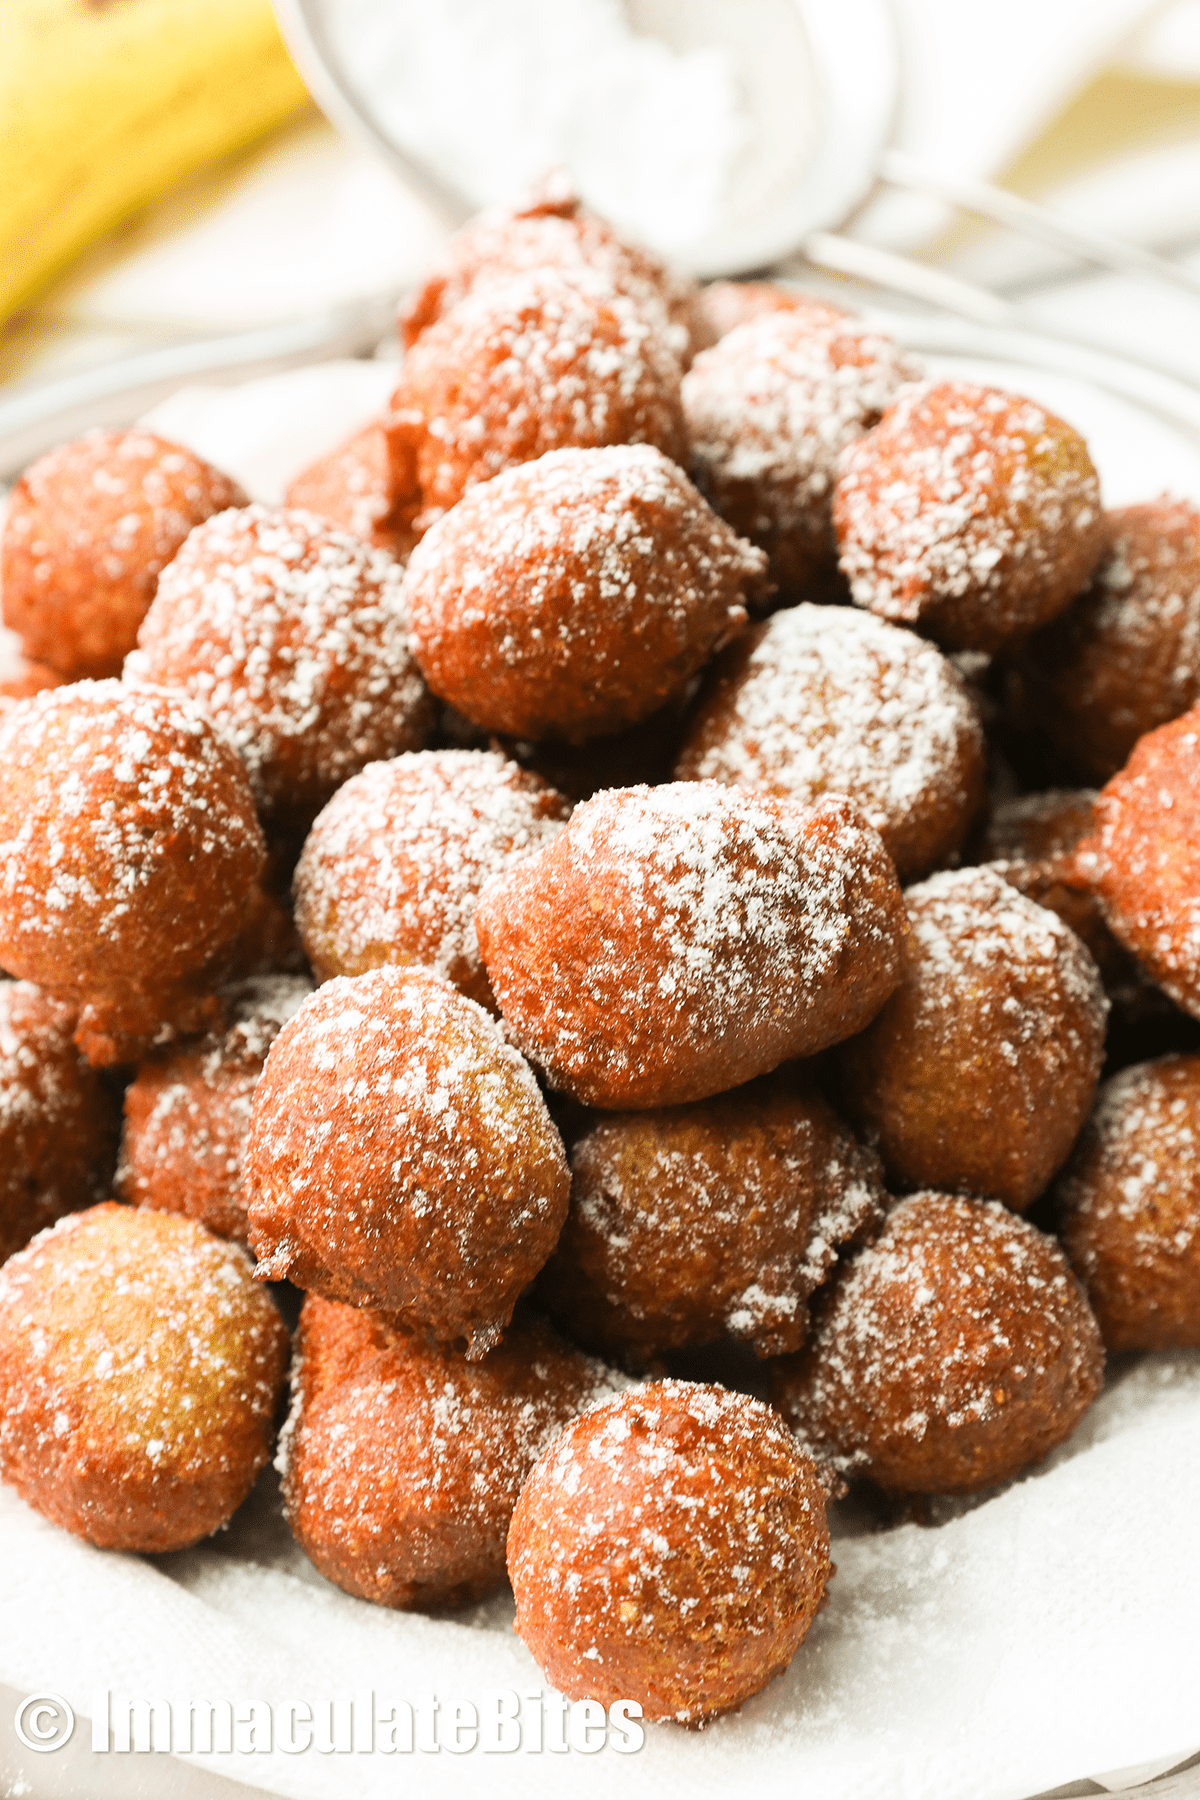 A pile of banana fritters dusted with powdered sugar